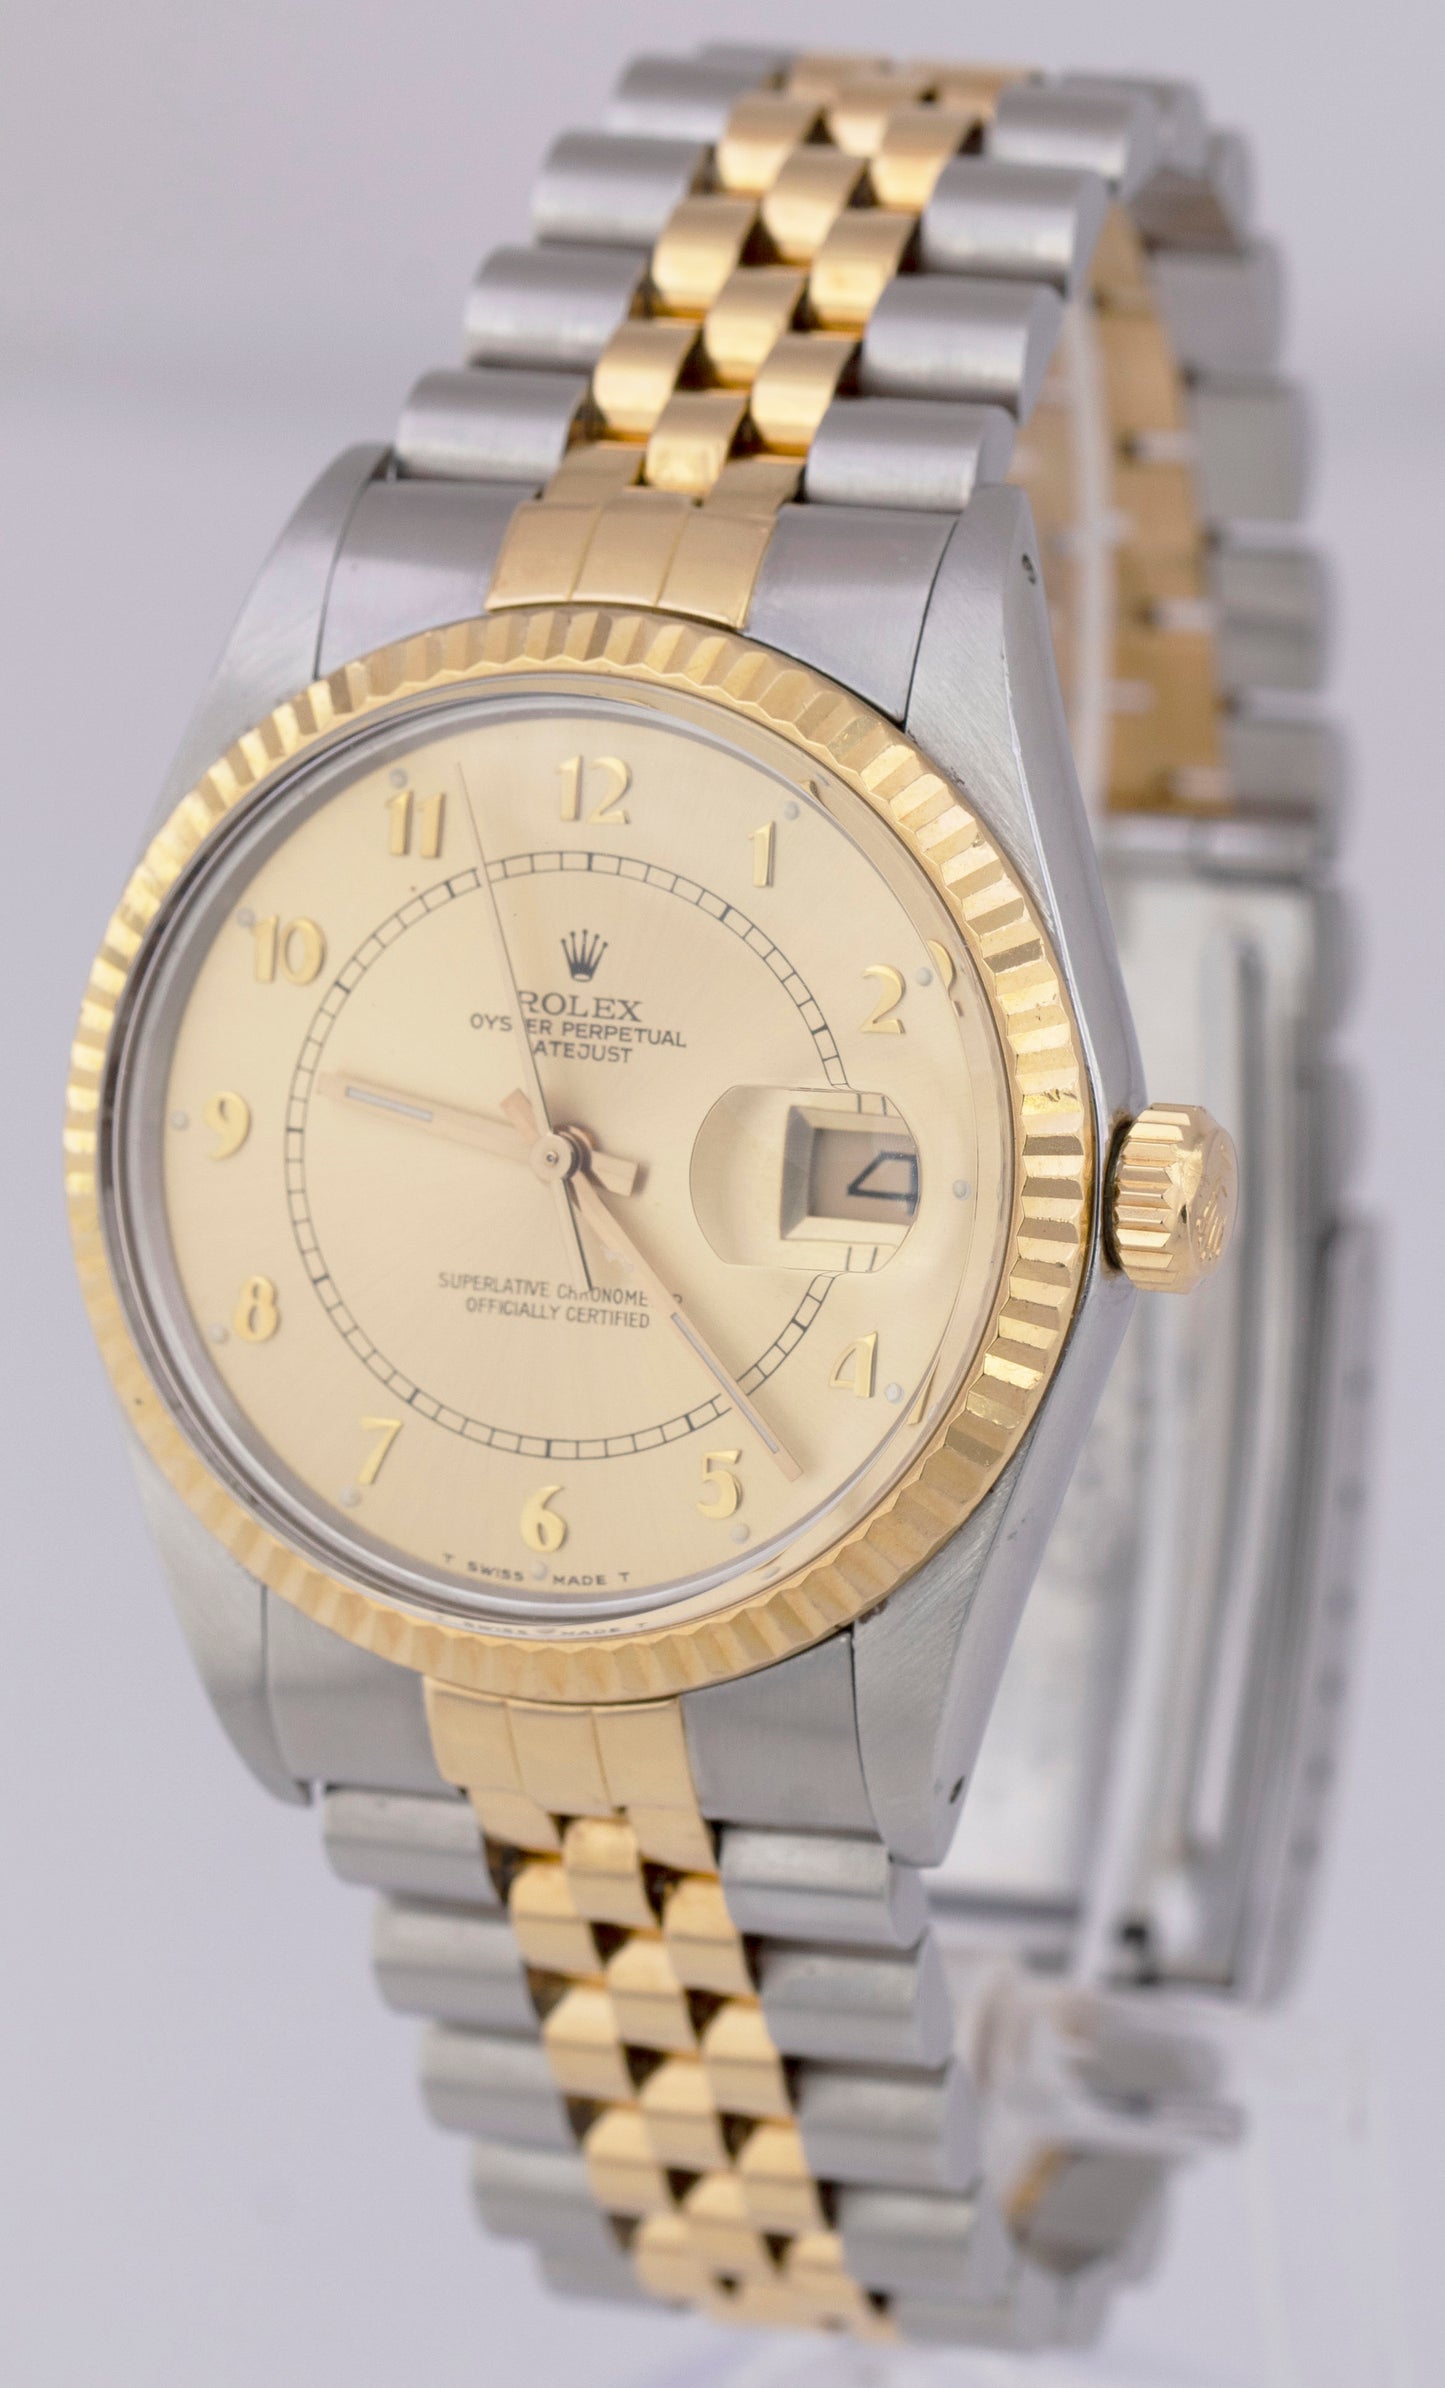 UNPOLISHED Rolex DateJust 36mm PAPERS Champagne BOILER GAUGE Two-Tone 16013 B+P